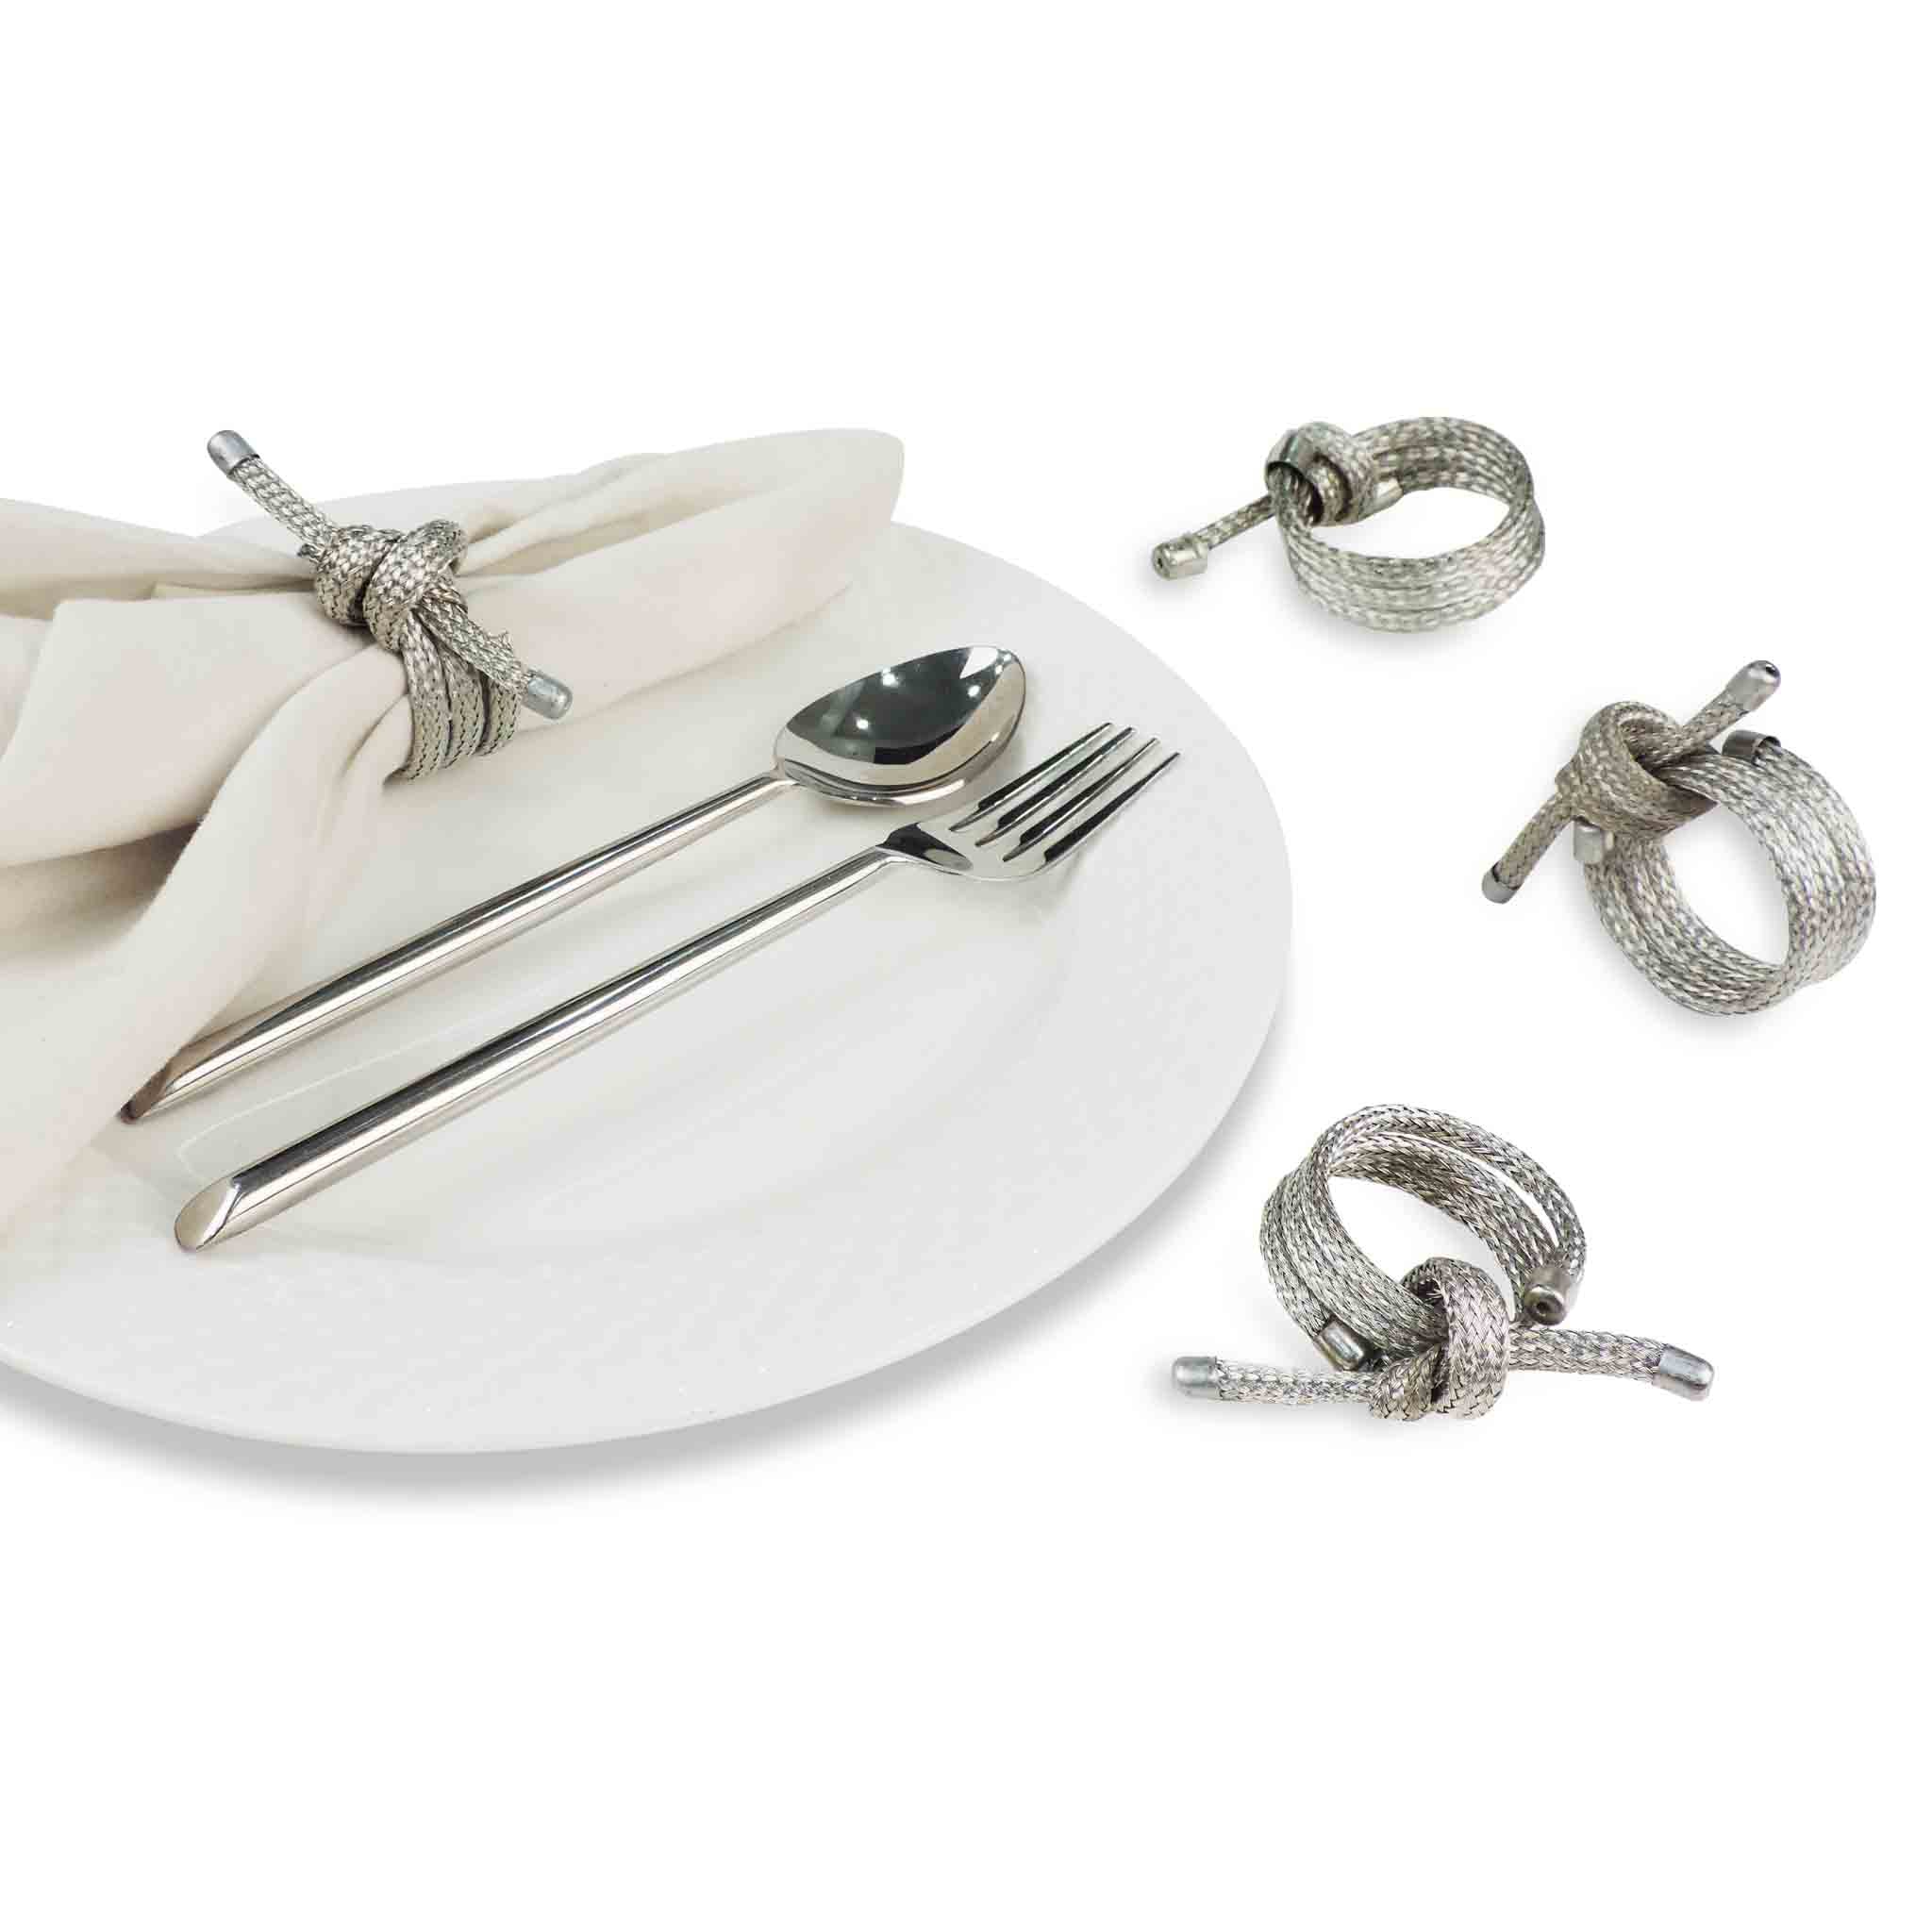 Glass Bead Table Setting for 4 - Placemats, Coasters & Napkin Rings in Silver Two Tone